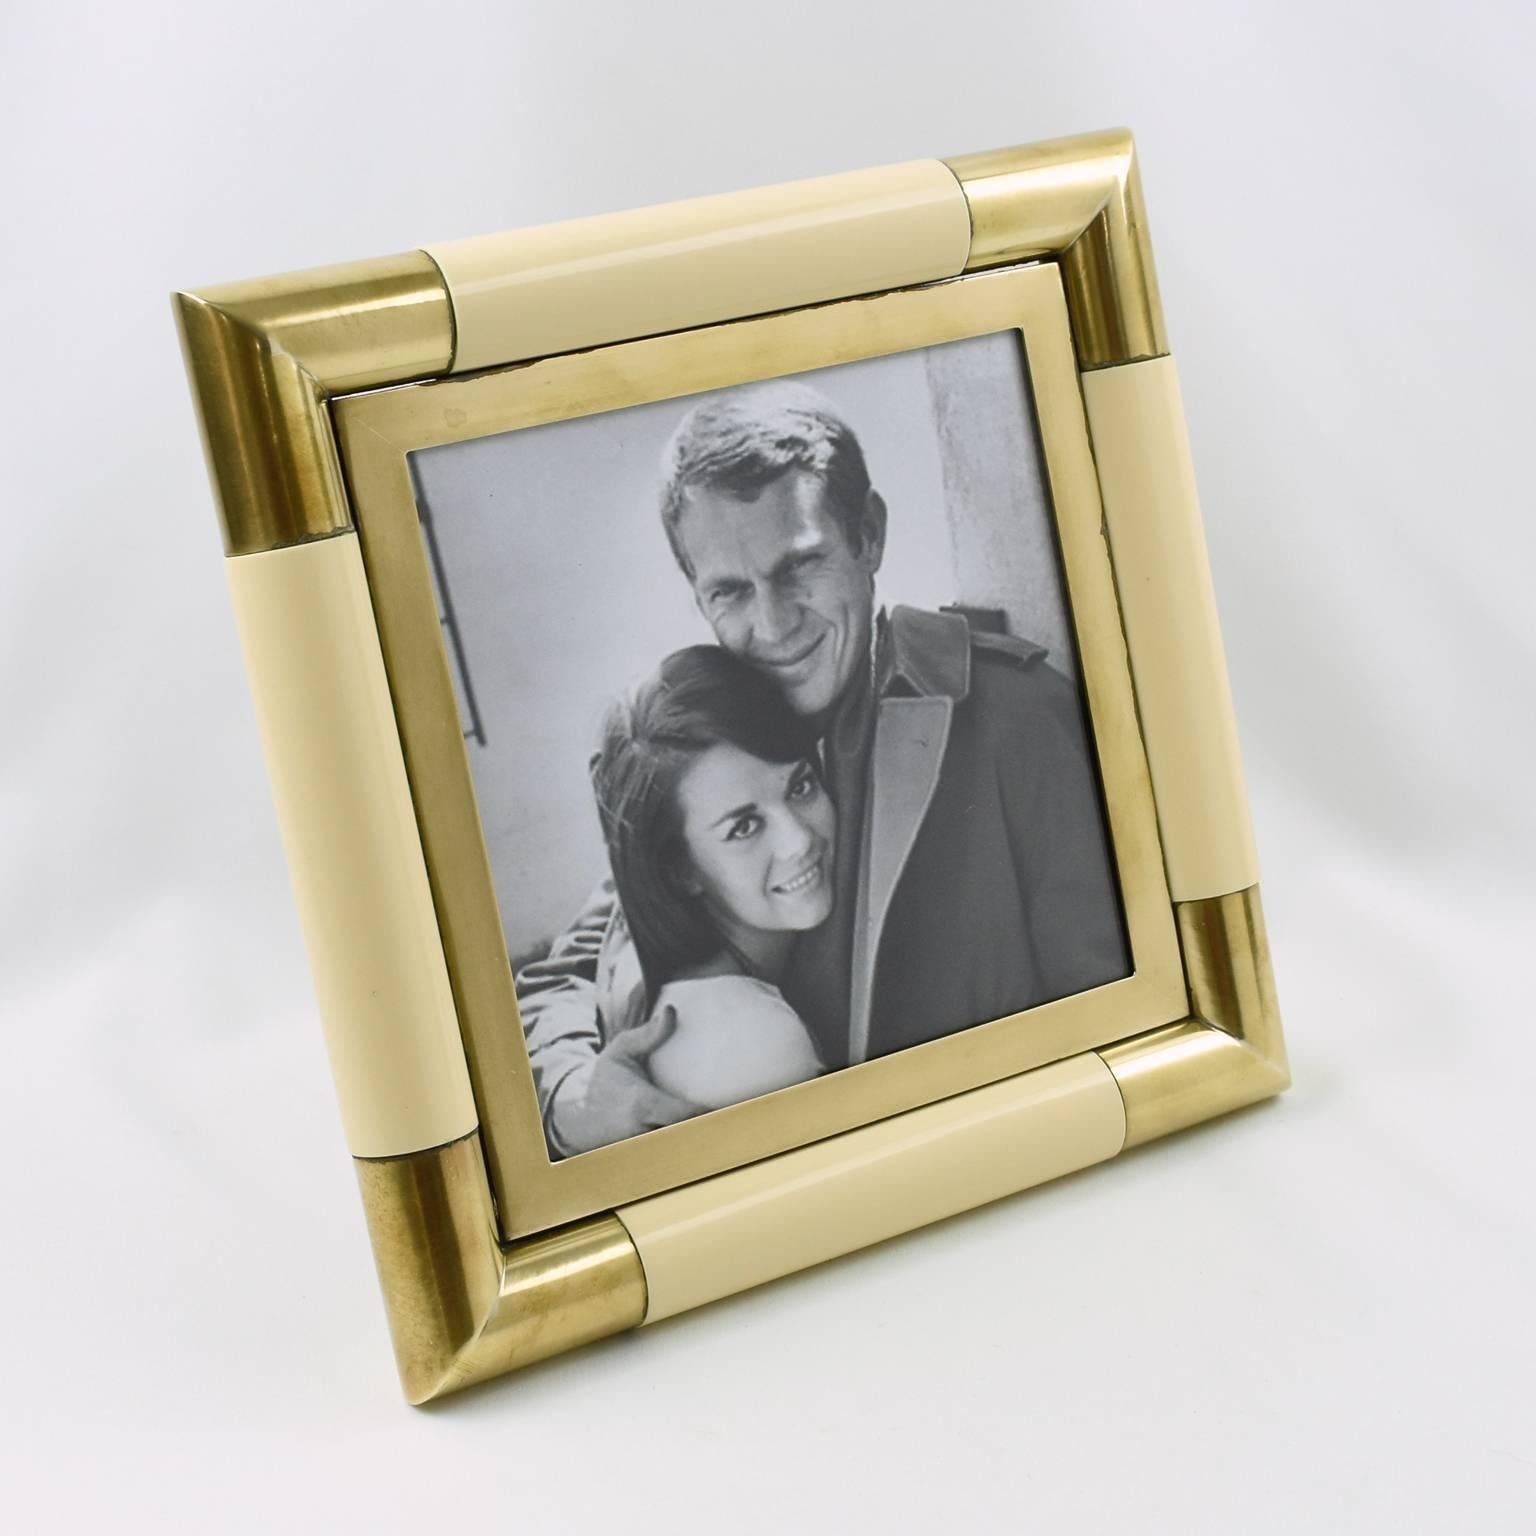 Stunning picture photo frame designed by Tommaso Barbi, Italy. Mid-Century modernist square shape with curvilinear edged brass framing compliment with ivory color lacquer. Easel and back in brown watered fabric.
Measurements:
Overall: 10.25 in. wide